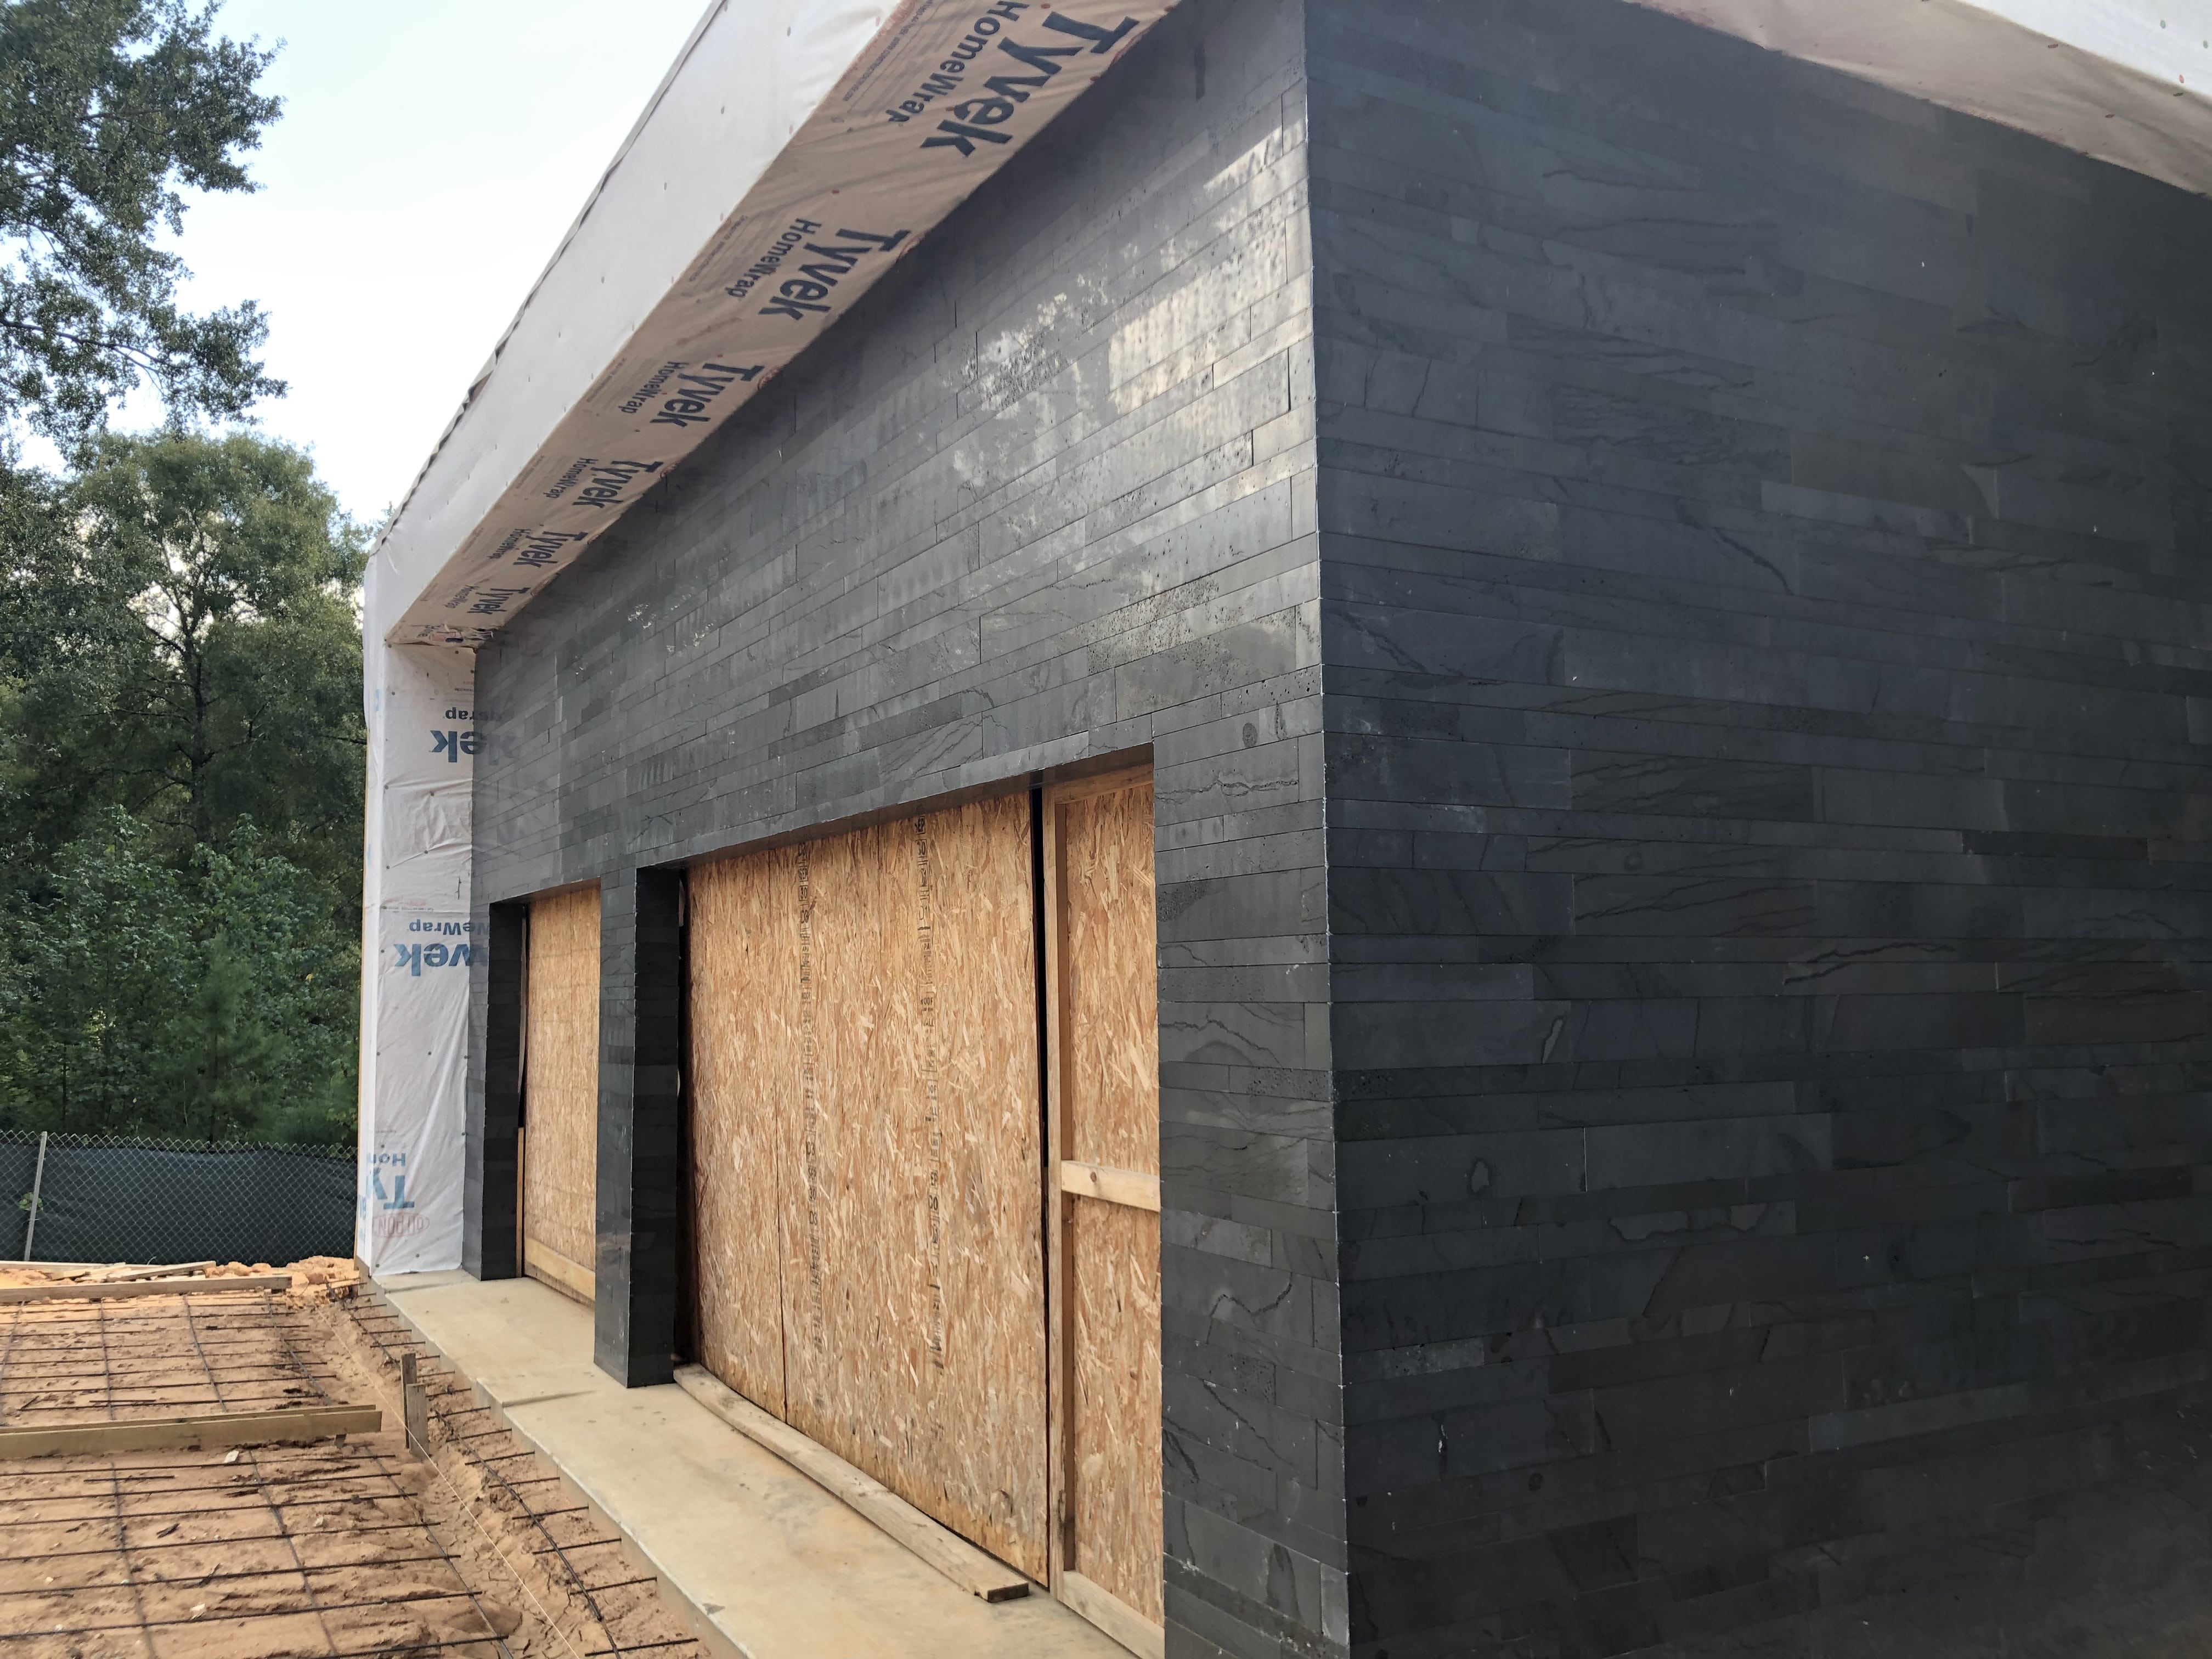 Norstone Graphite Planc Large Format Tile on a residential wall under construction showing an outside corner created with miter cuts